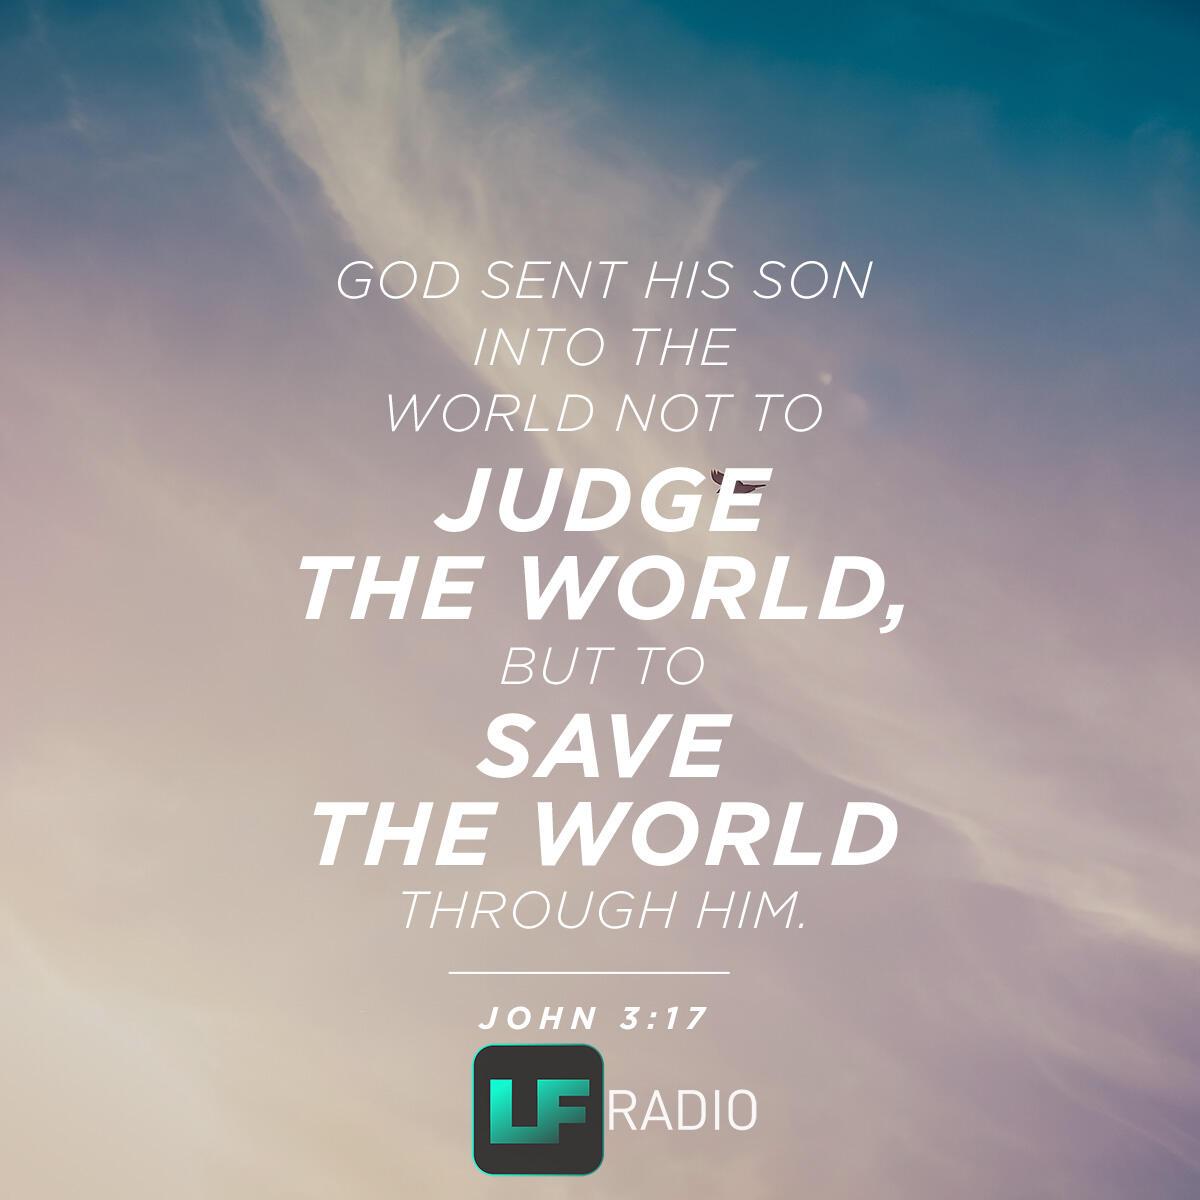 John 3:17 - Verse of the Day